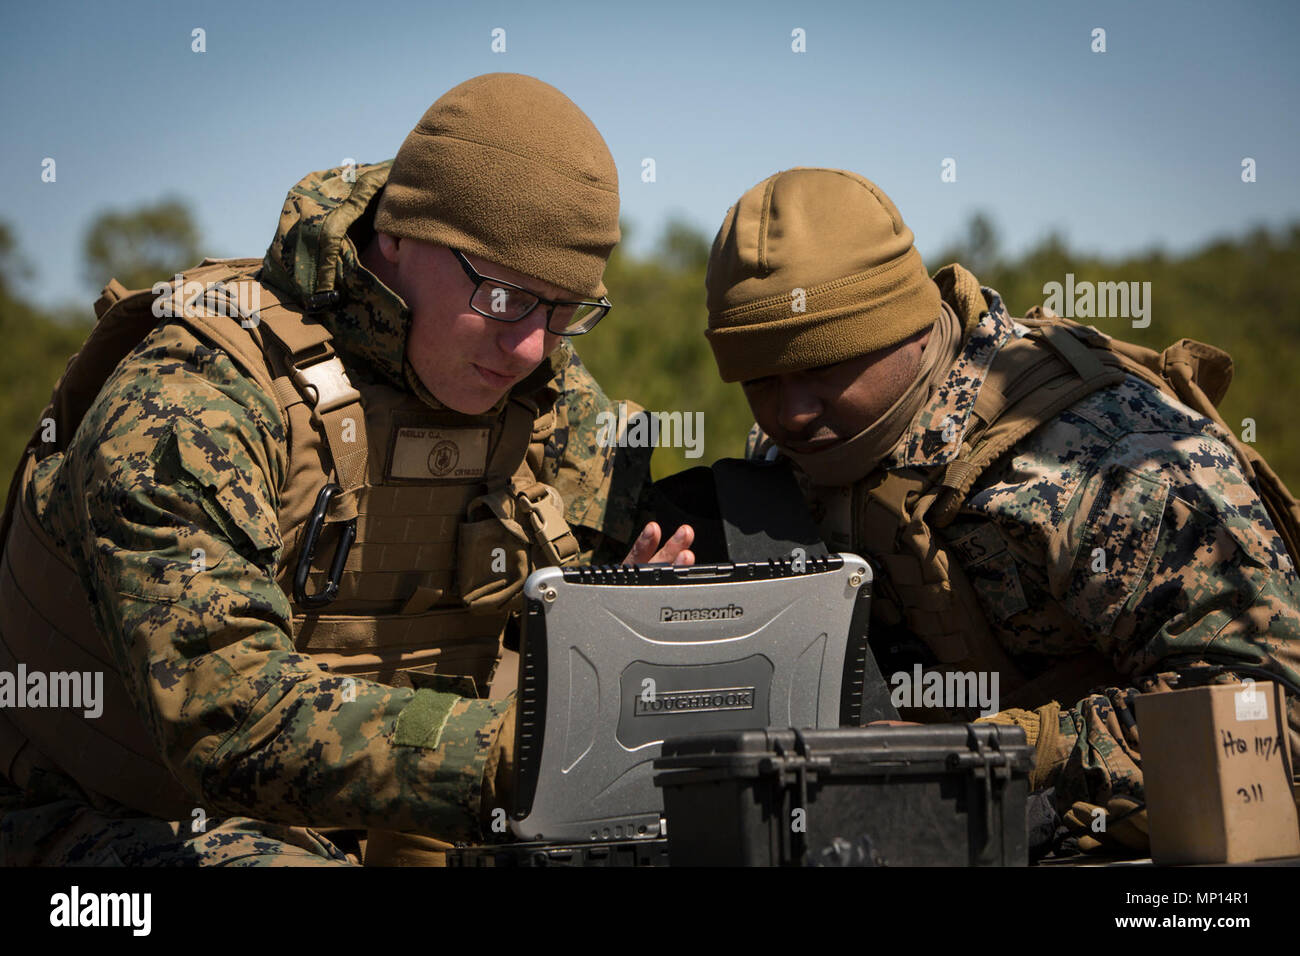 U.S. Marine Corps Cpl. Connor Reilly, an intelligence specialist, and Sgt. Dominique Dillard, a senior analyst with 3rd Battalion, 2nd Marine Regiment, 2nd Marine Division (2d MARDIV), perform a functions check during Marine Corps Combat Readiness Evaluation (MCCRE) on Camp Lejeune, N.C., March 13, 2018. The MCCRE is a pre-deployment training evaluation designed to test the skills of Marines and Sailors with possible combat scenarios. Stock Photo